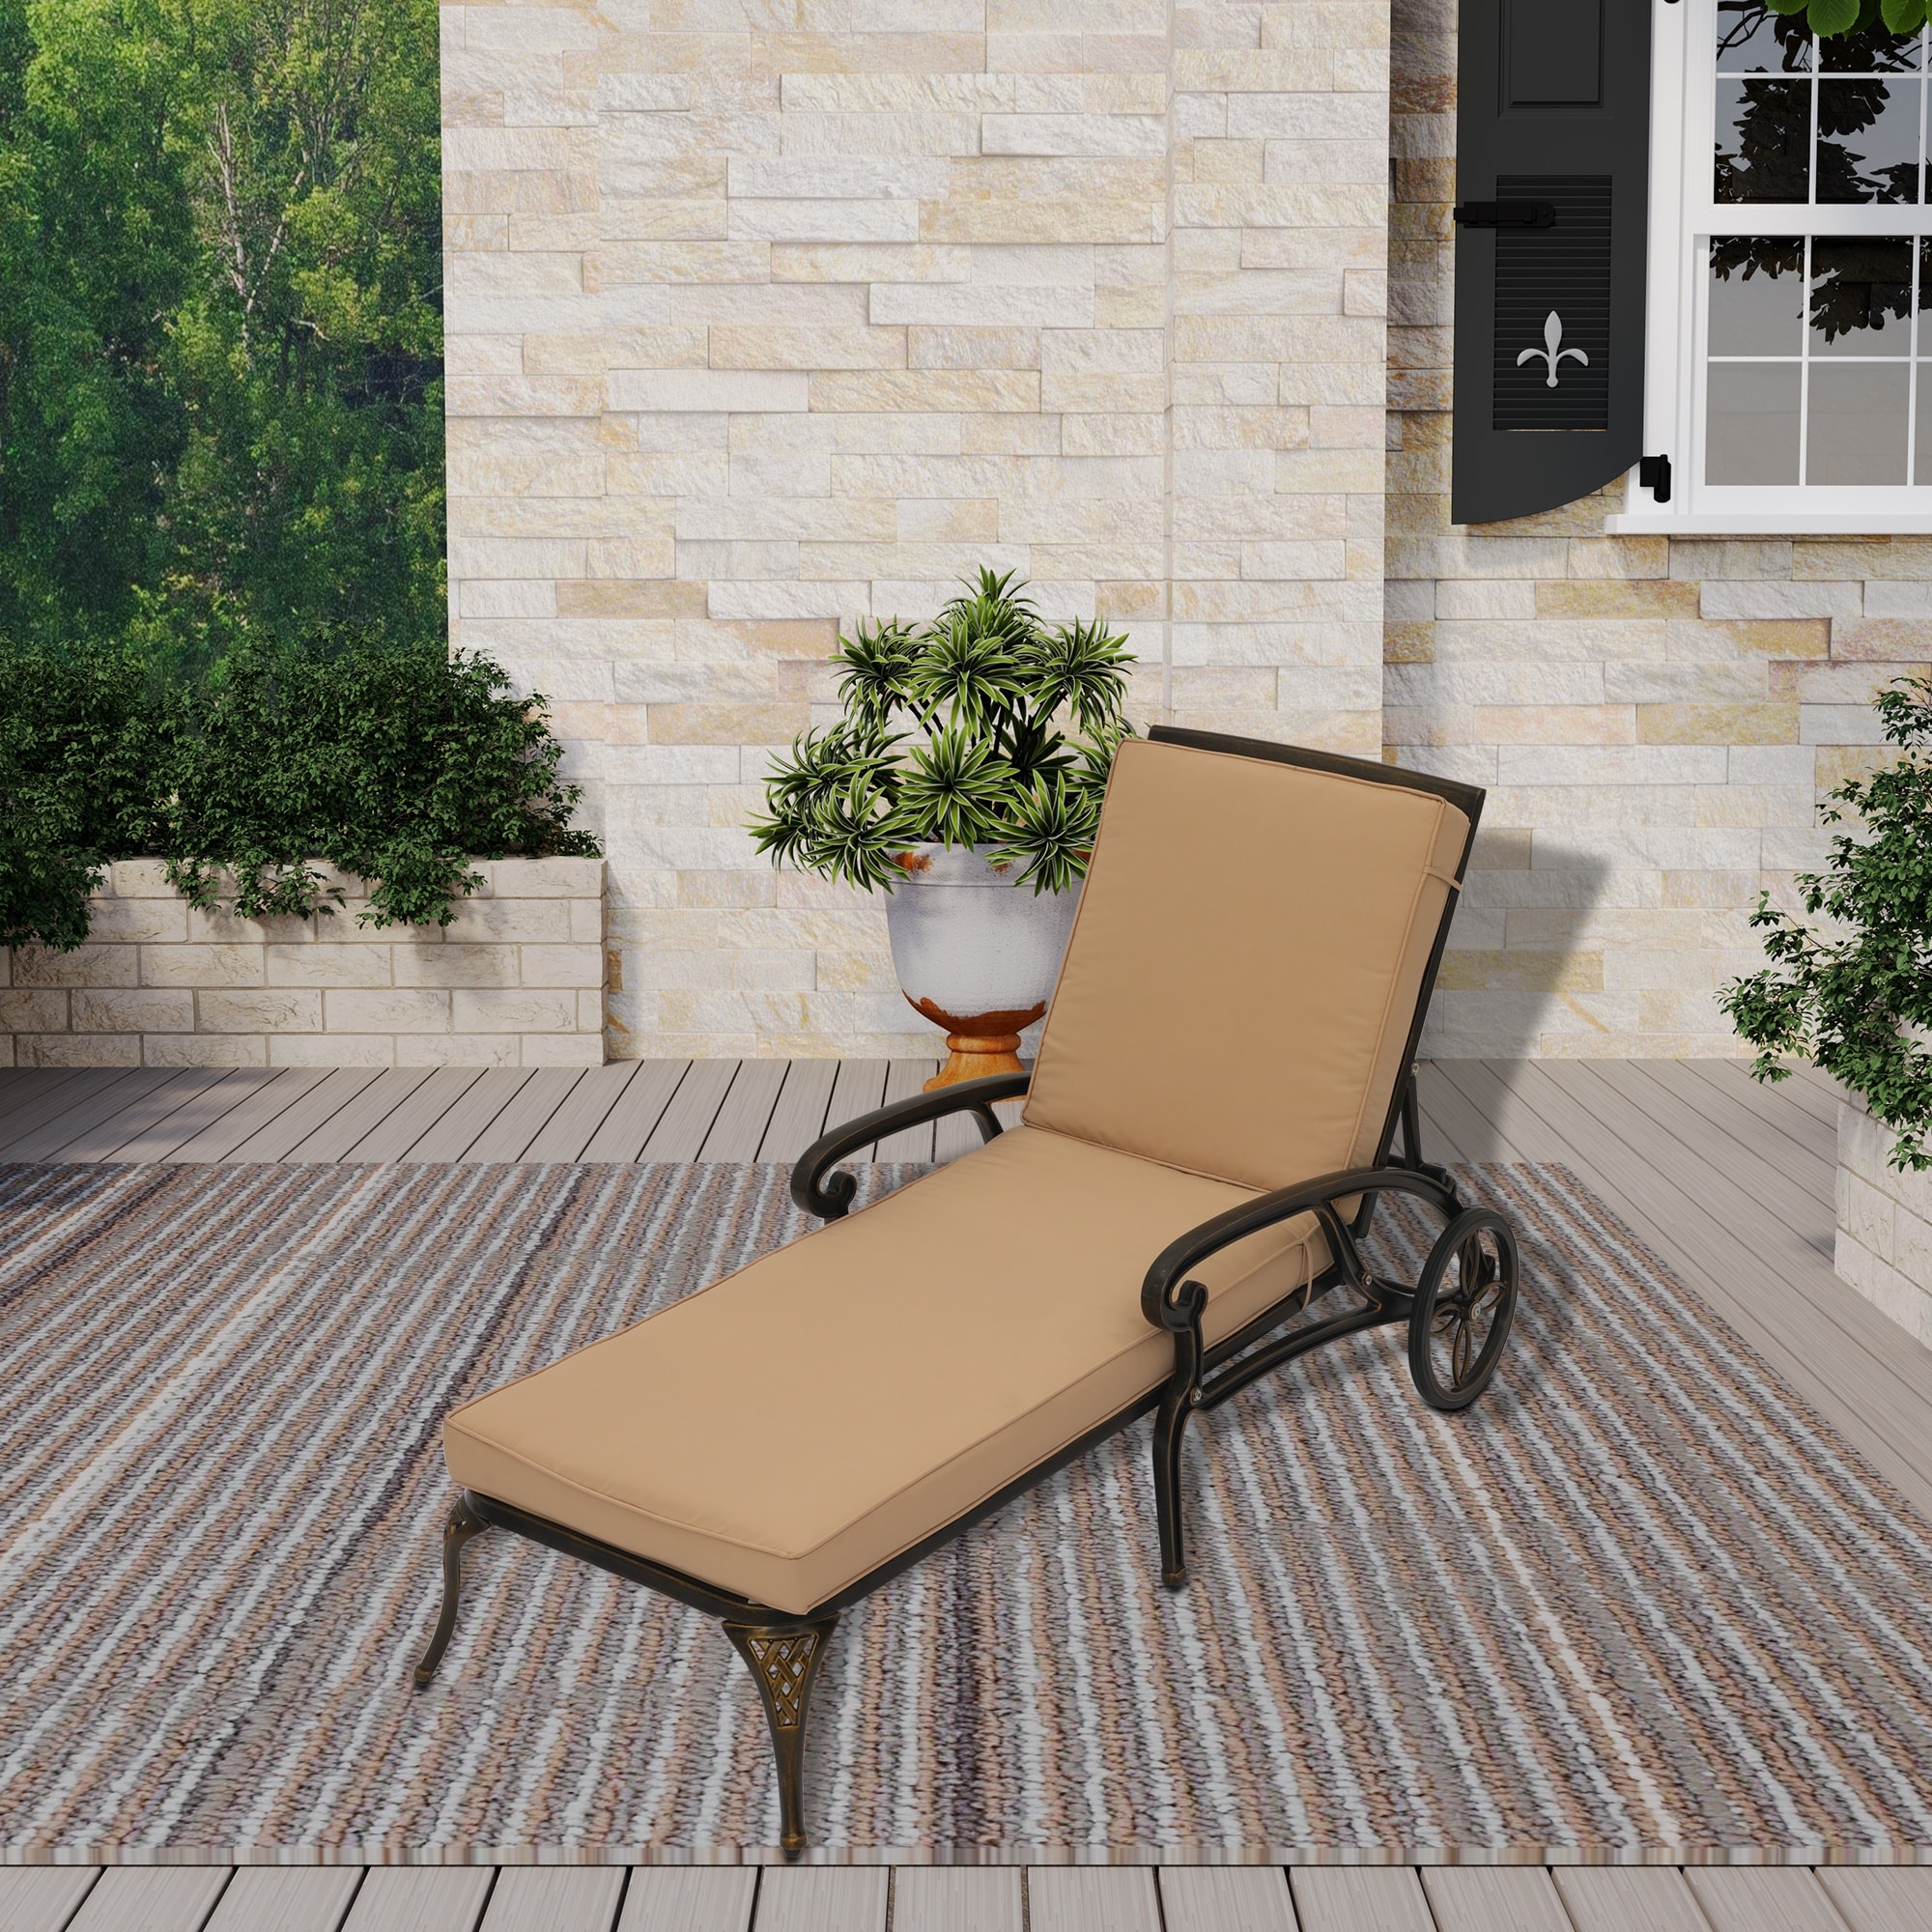 Clihome Cast Aluminum Patio Reclining Chaise Lounge With Beige Cushion